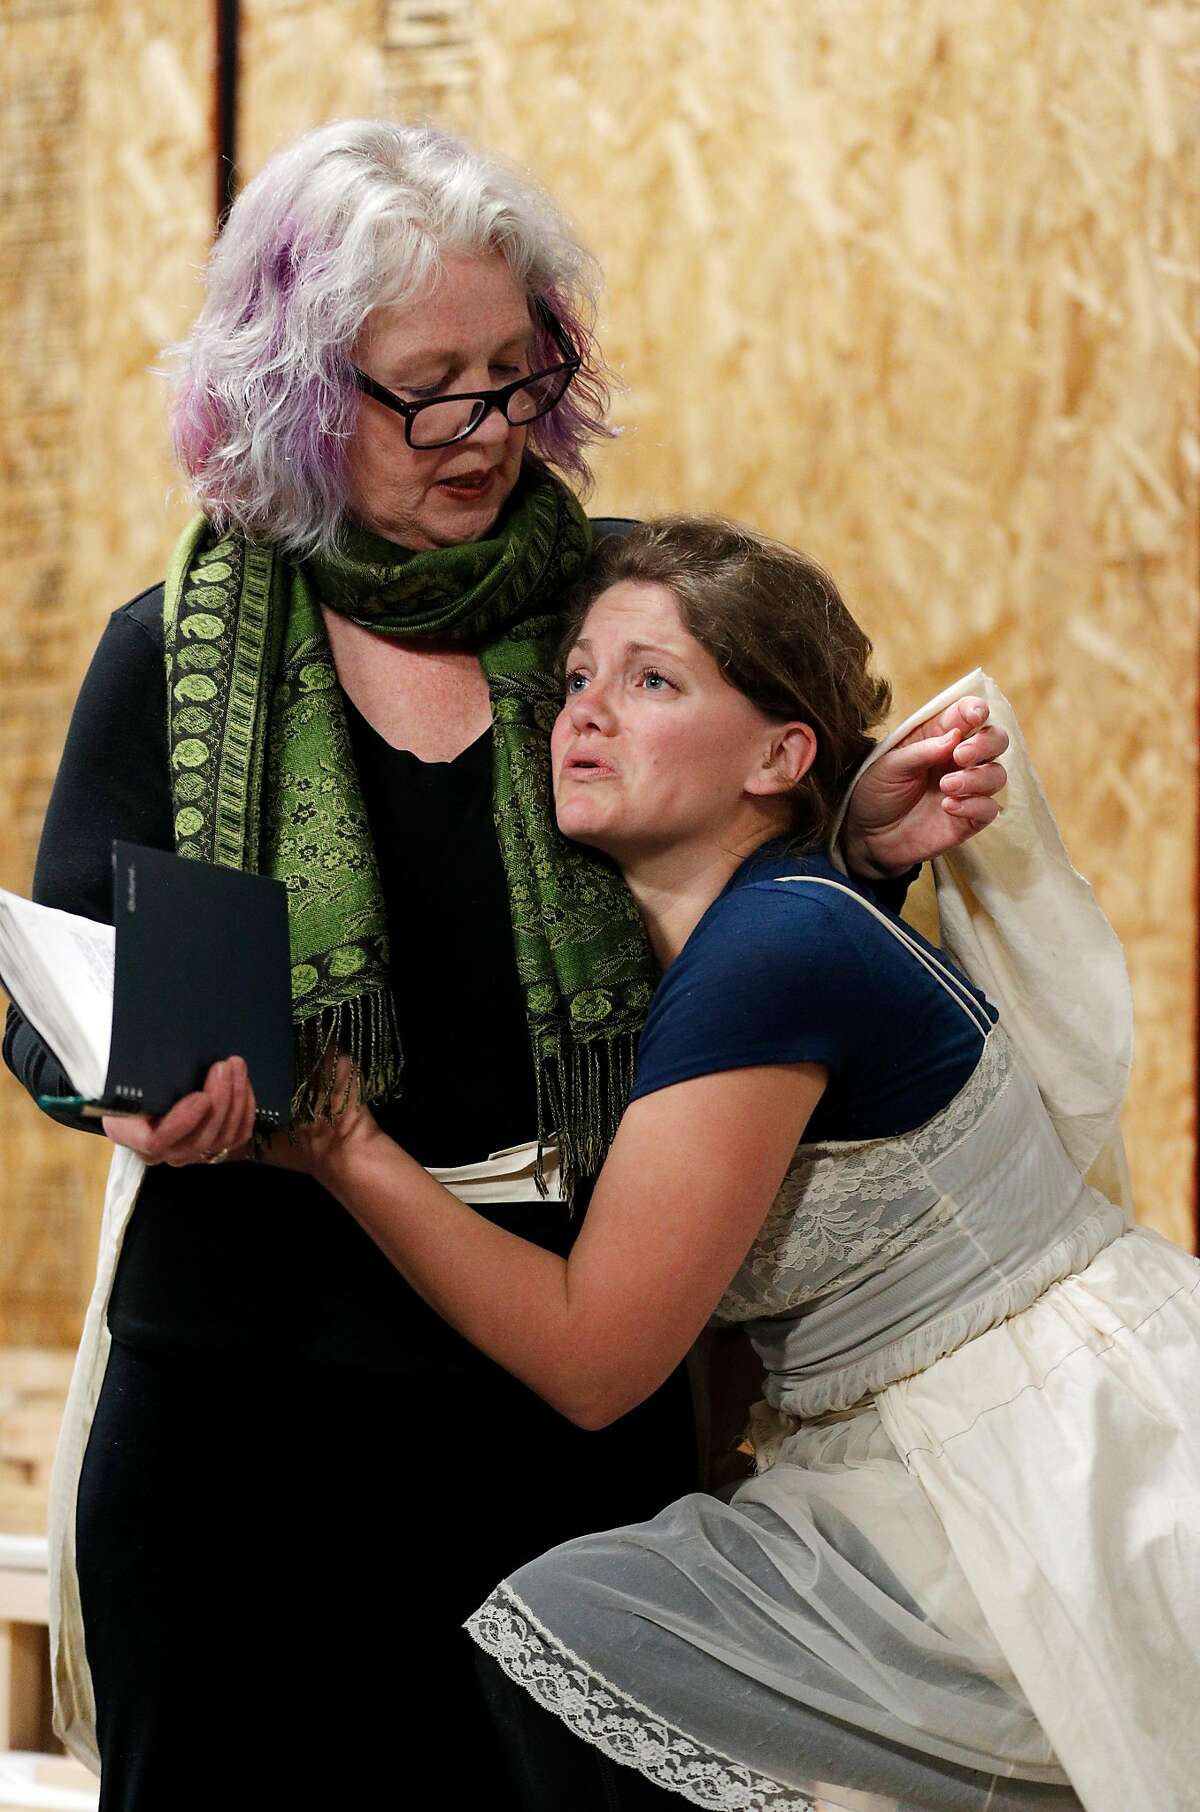 Christine Augello as Queen Marguerite, left, and Mikka Bonel as Queen Marie during rehearsal for "Exit the King," at the Exit Theater in San Francisco, Calif., on Wednesday, February 28, 2018. Stuart Bousel is a playwright, theater director and producer who is currently directing a production of Eugene Ionesco's "Exit the King" at the Exit Theatre, running 3/16-4/7.